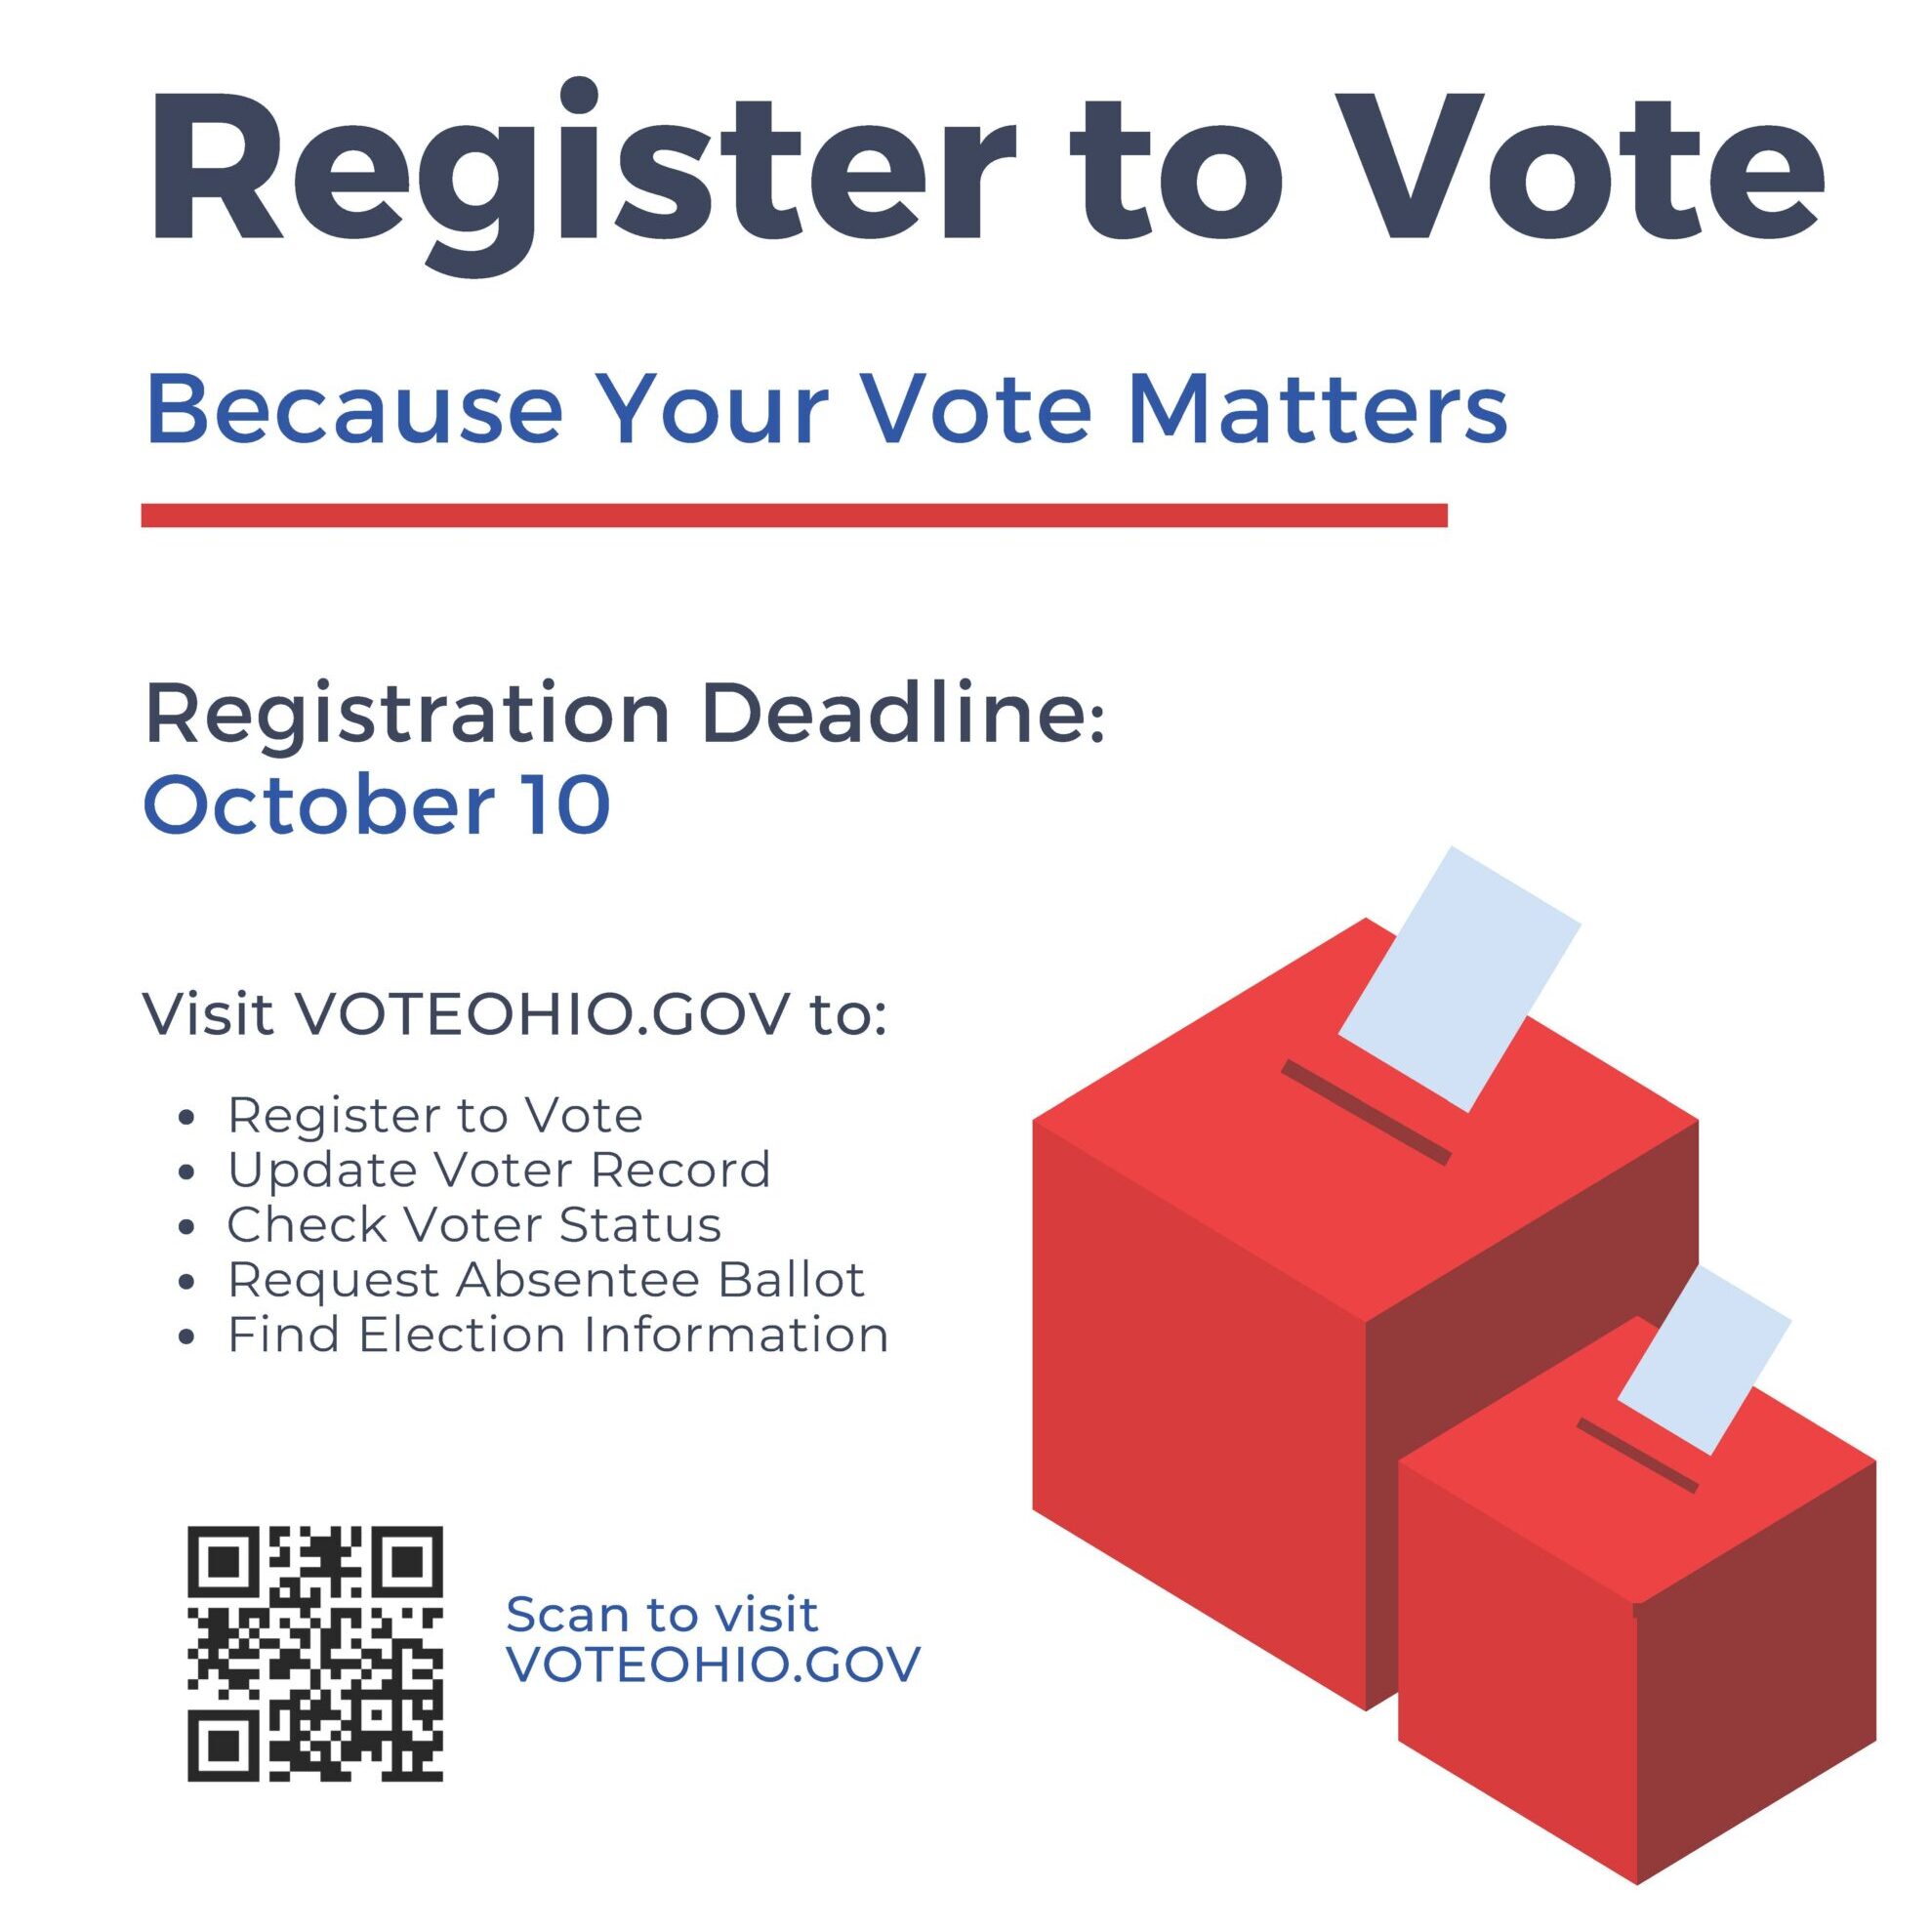 Register to vote because your vote matters. Visit voteohio.gov for details on how to register